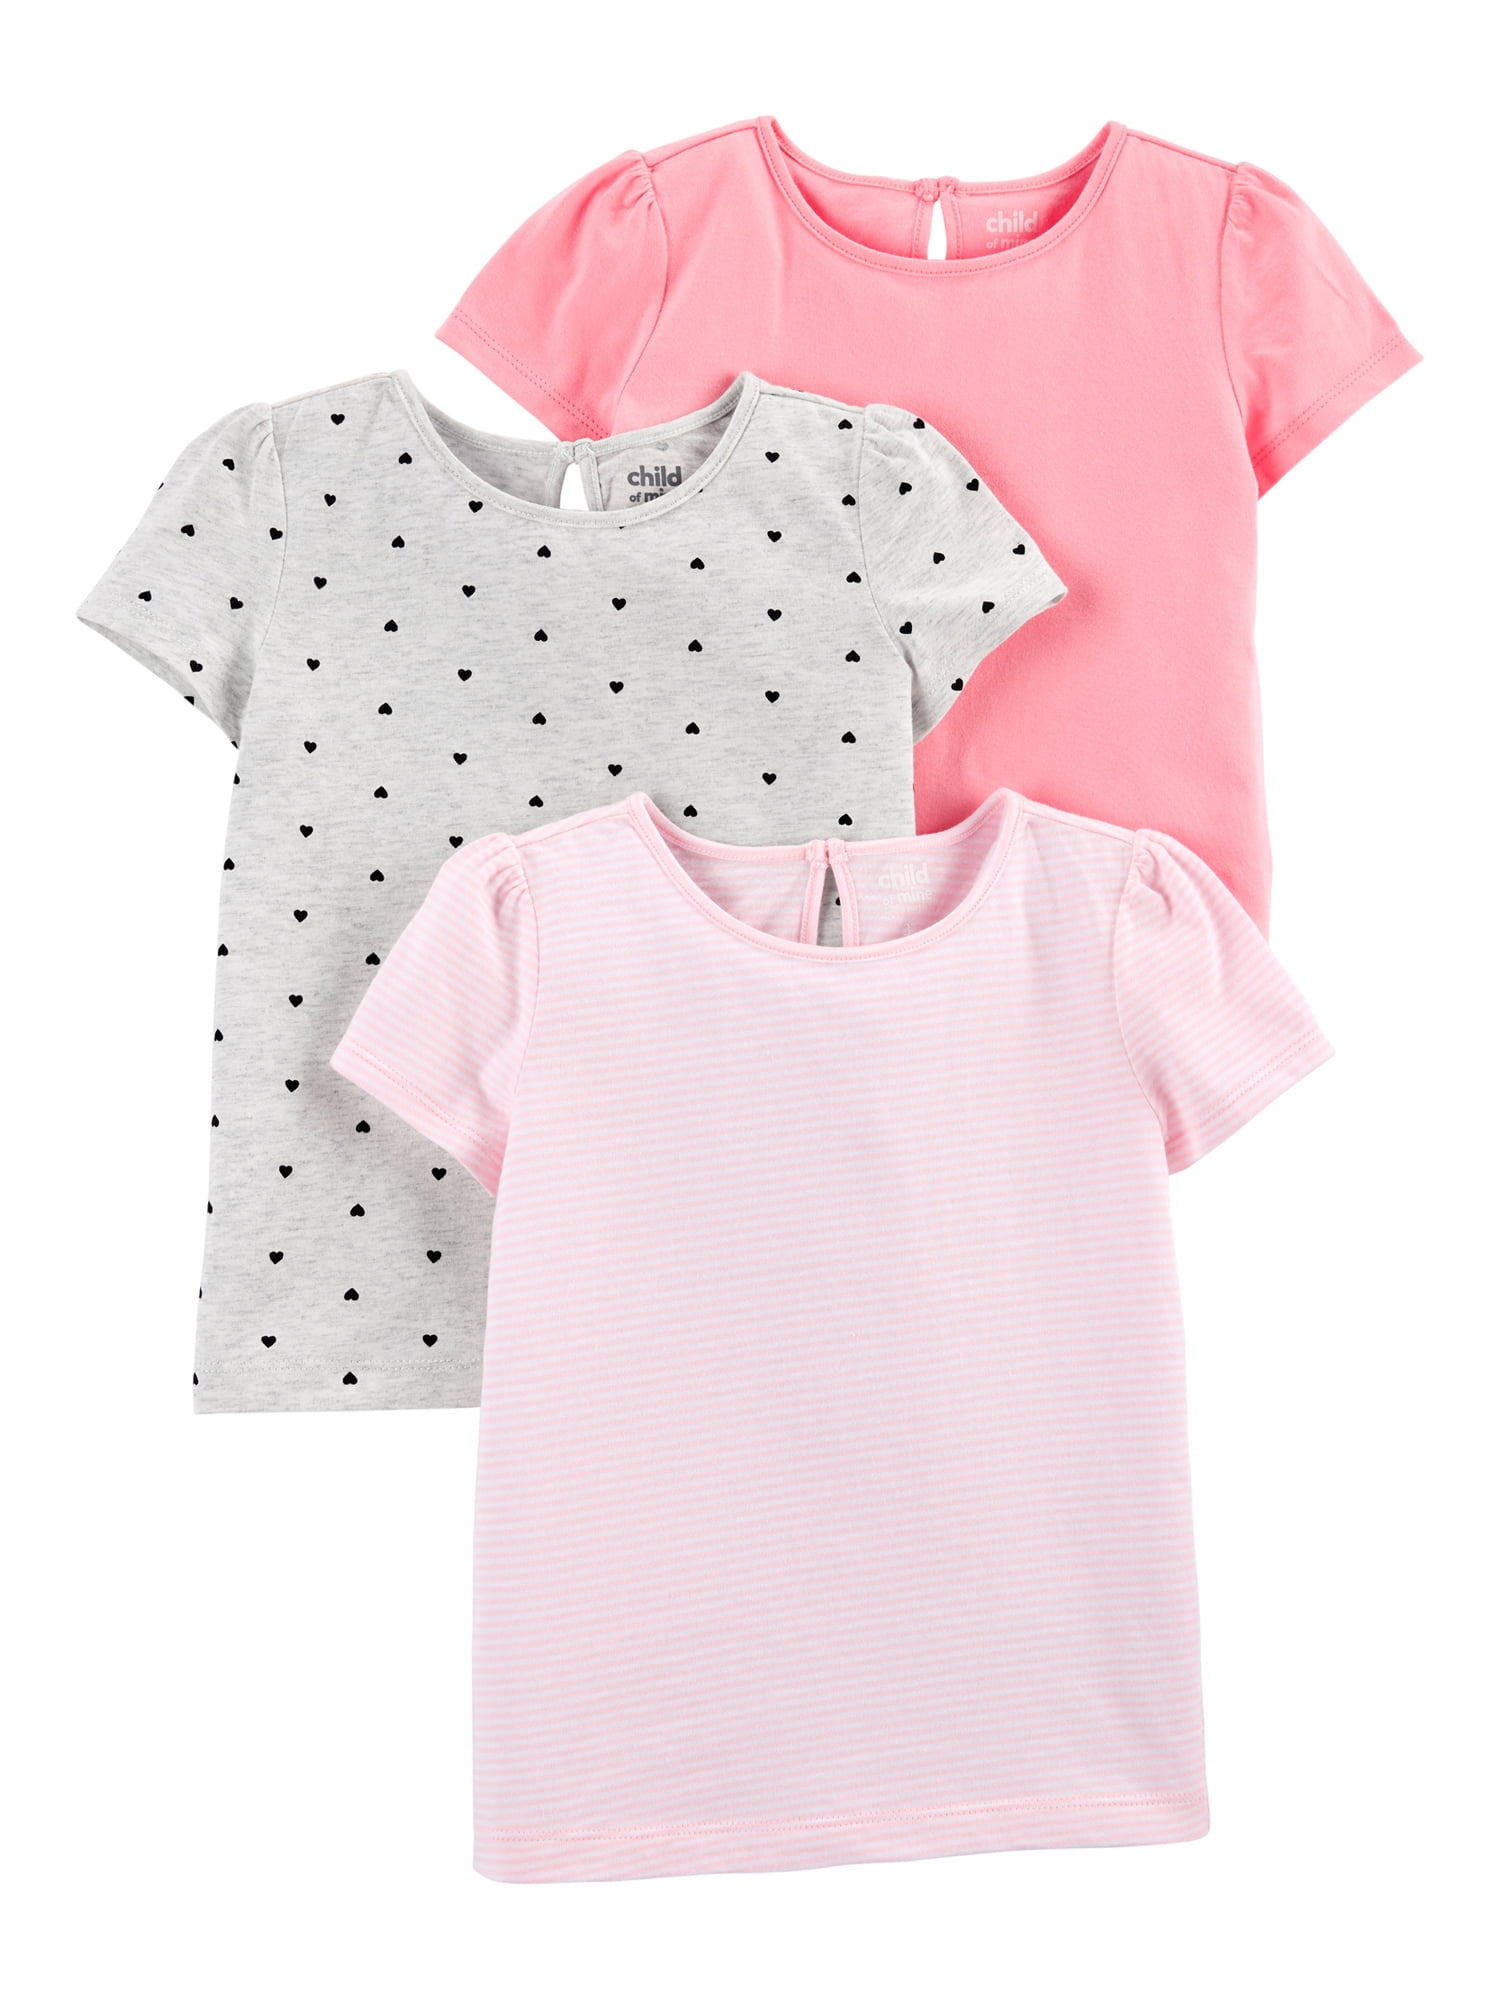 Simple Joys by Carters Toddler Girls 3-Pack Solid Short-Sleeve Tee Shirts 